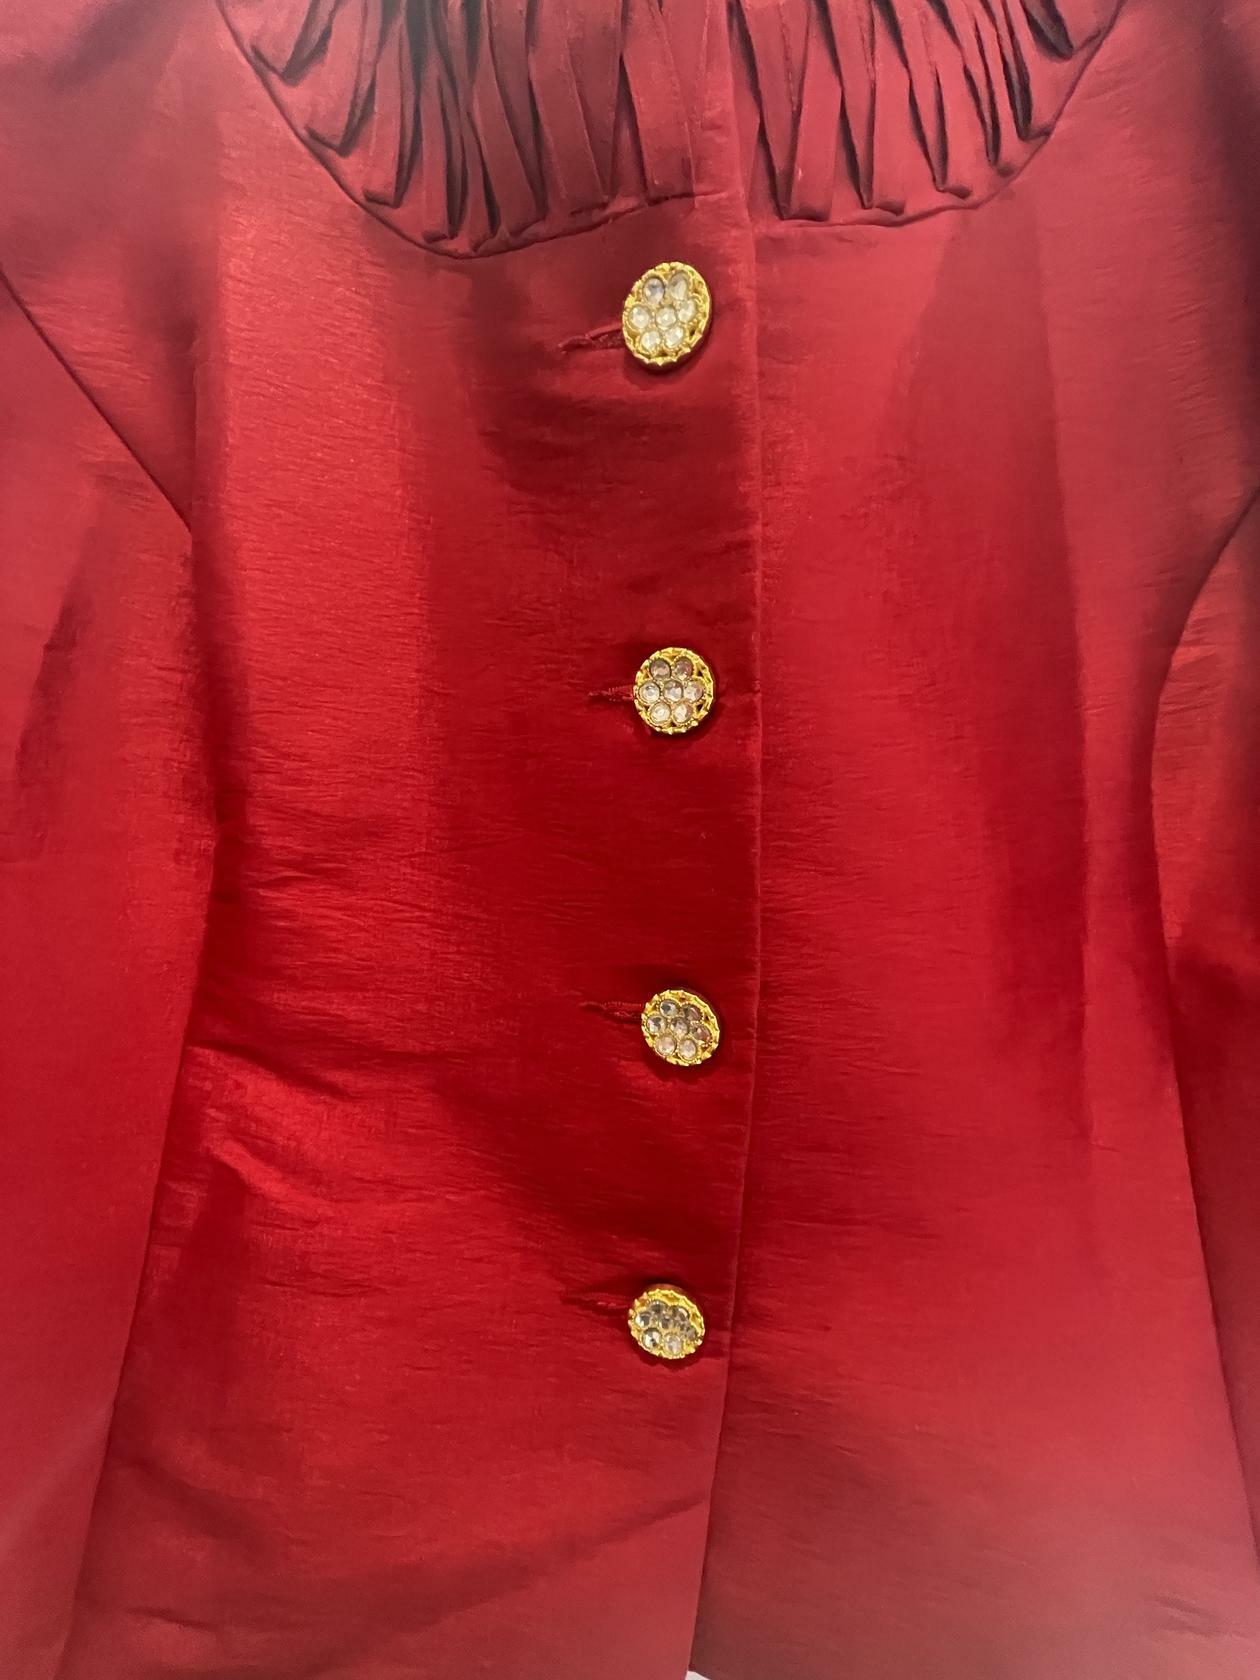 Womens Nicolette Red Jacket Ruffles Bedazzled Buttons Size 18 Formal Casual Blazer - Very Good